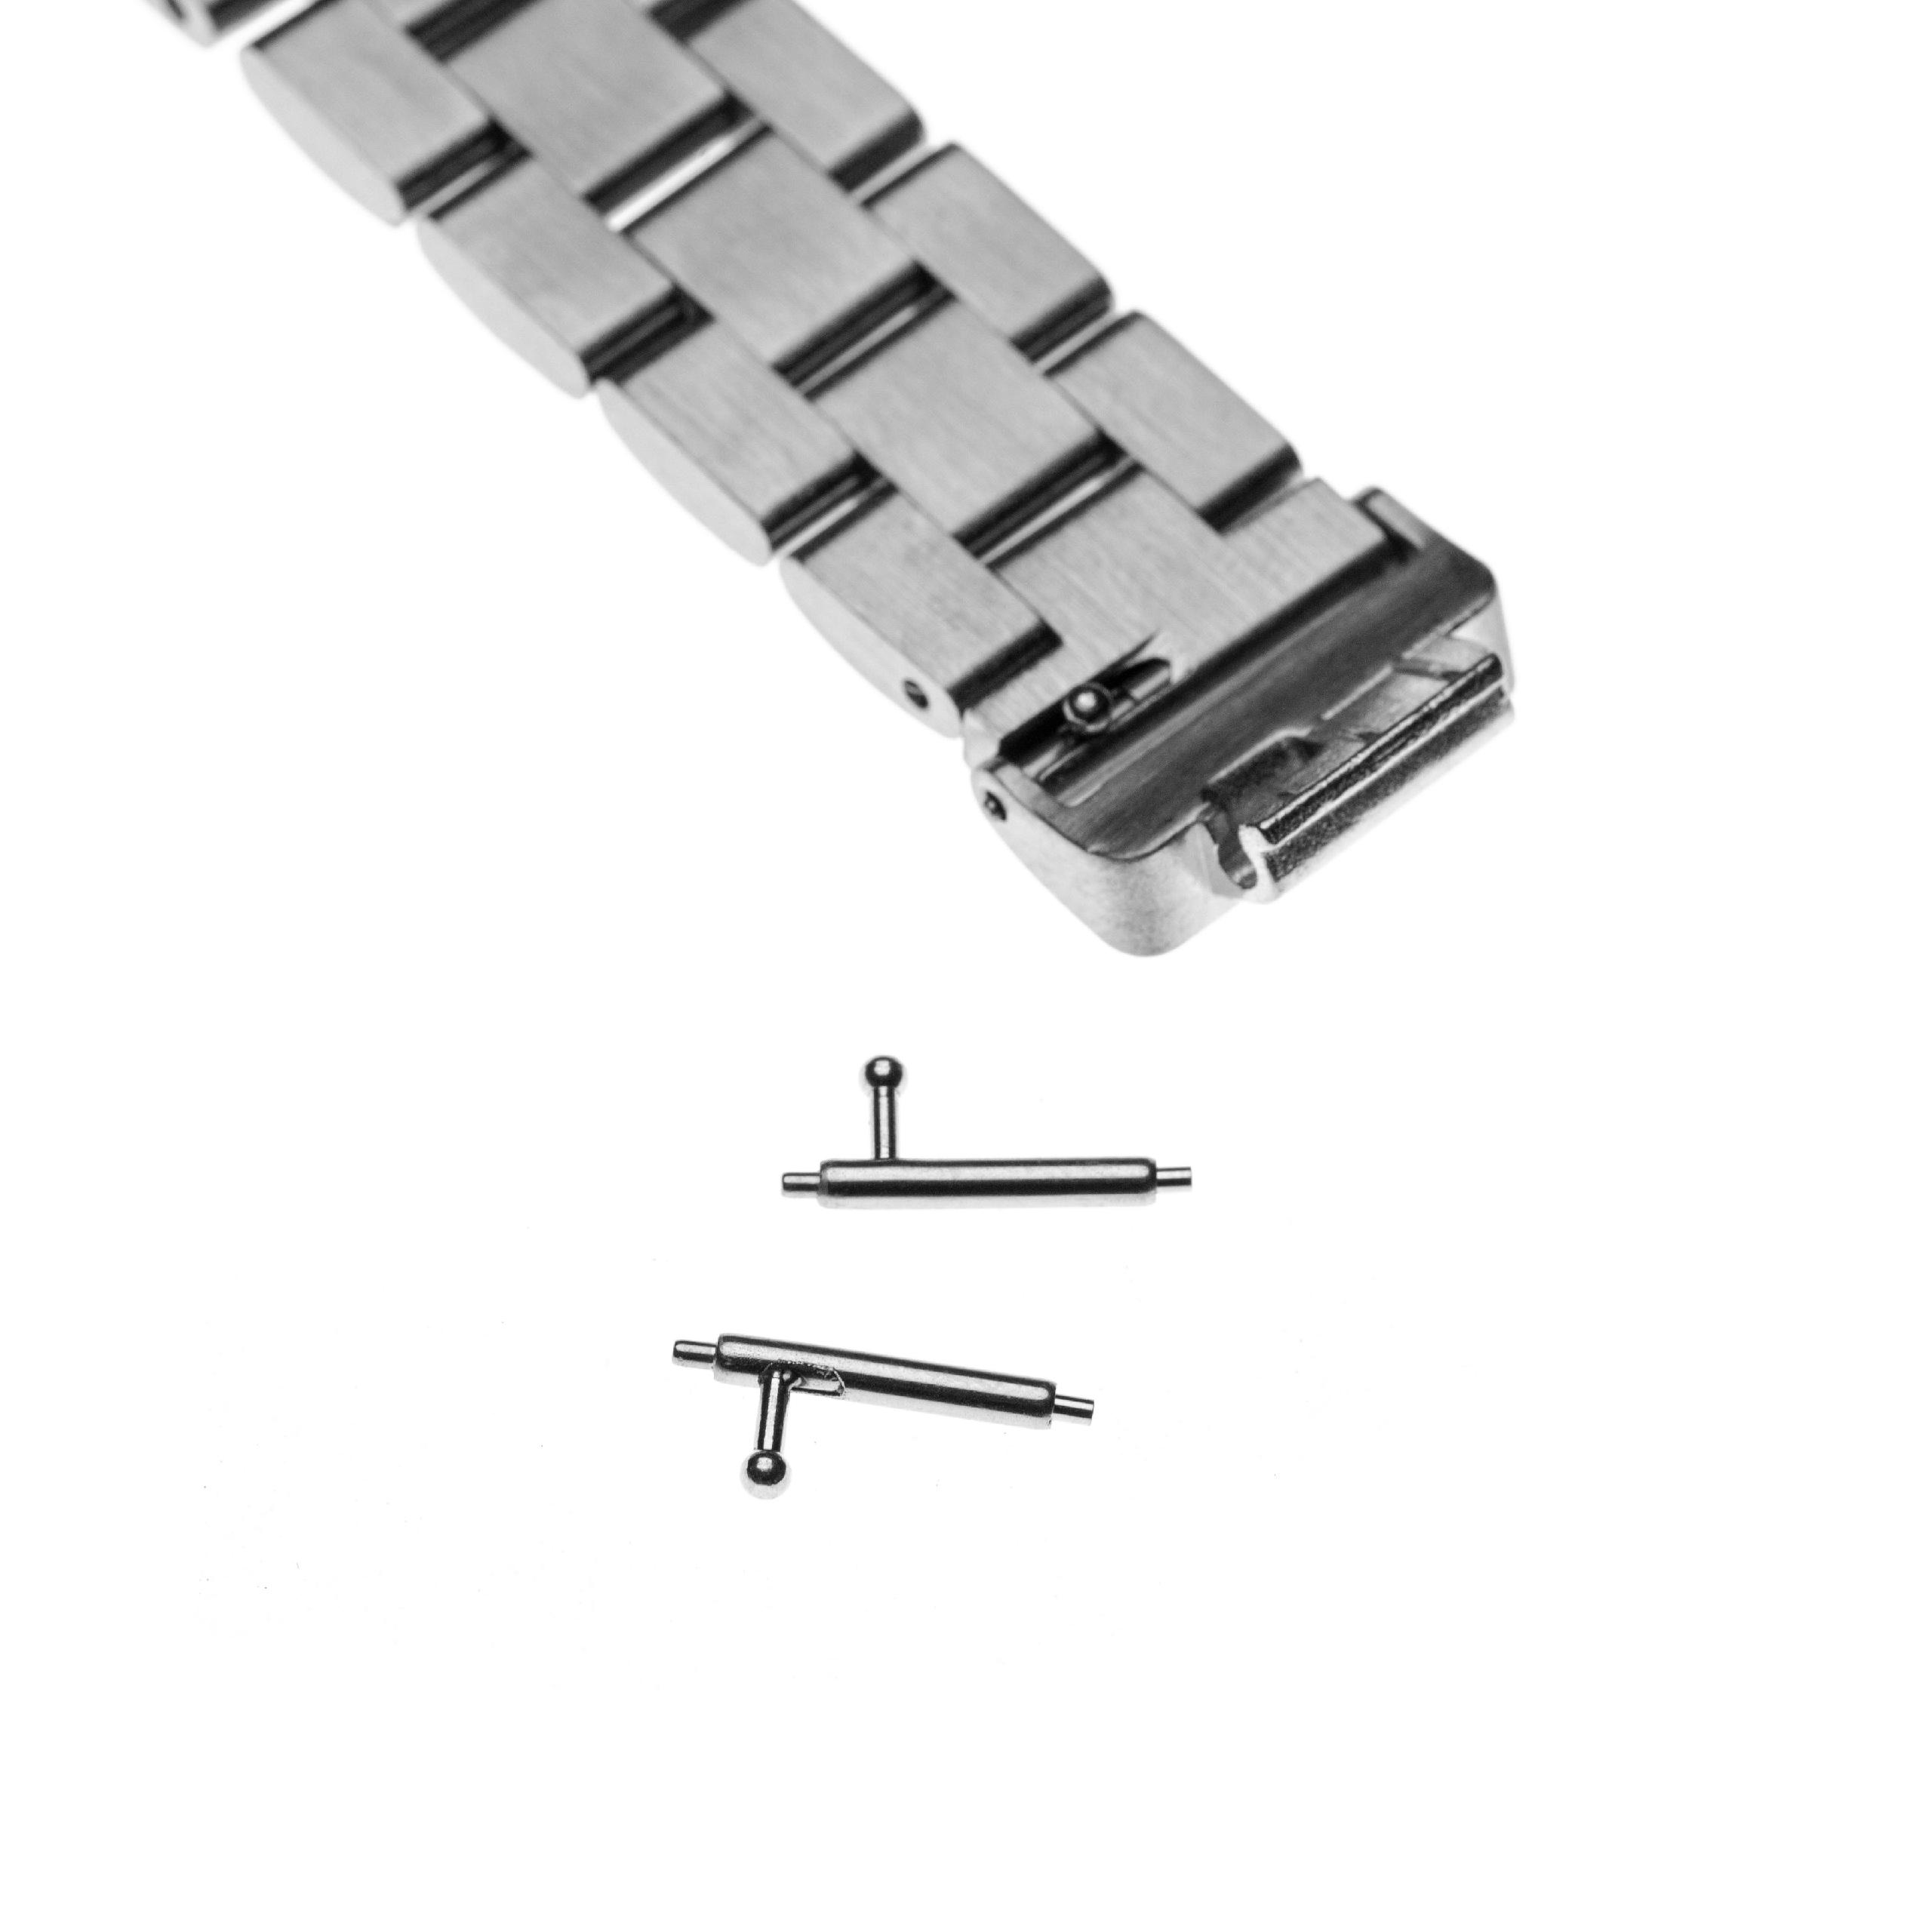 wristband for Fitbit Smartwatch - 18 cm long, 14mm wide, stainless steel, silver